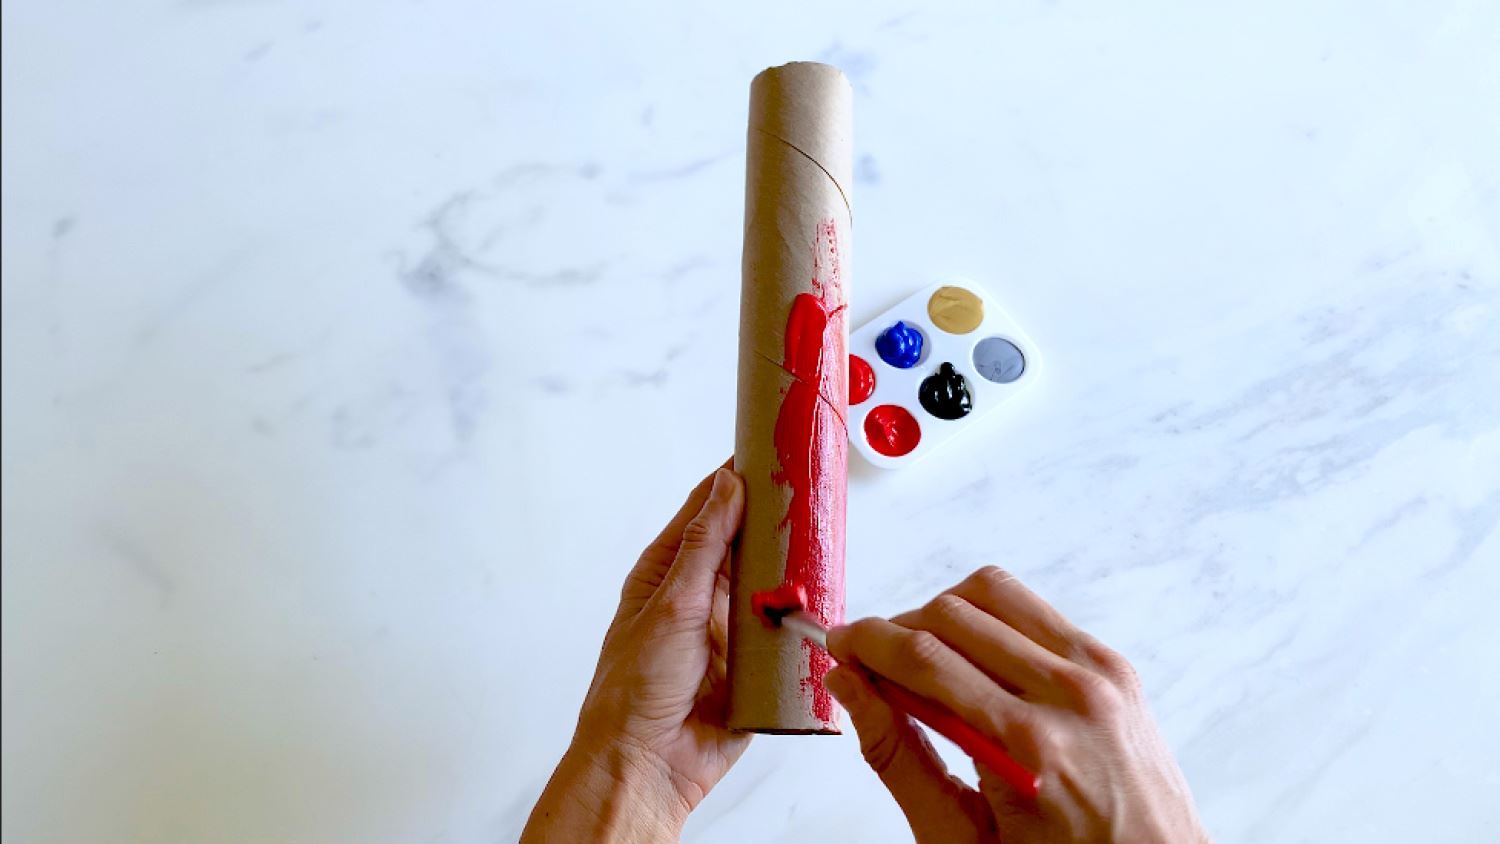 Paint one of the paper towel tubes